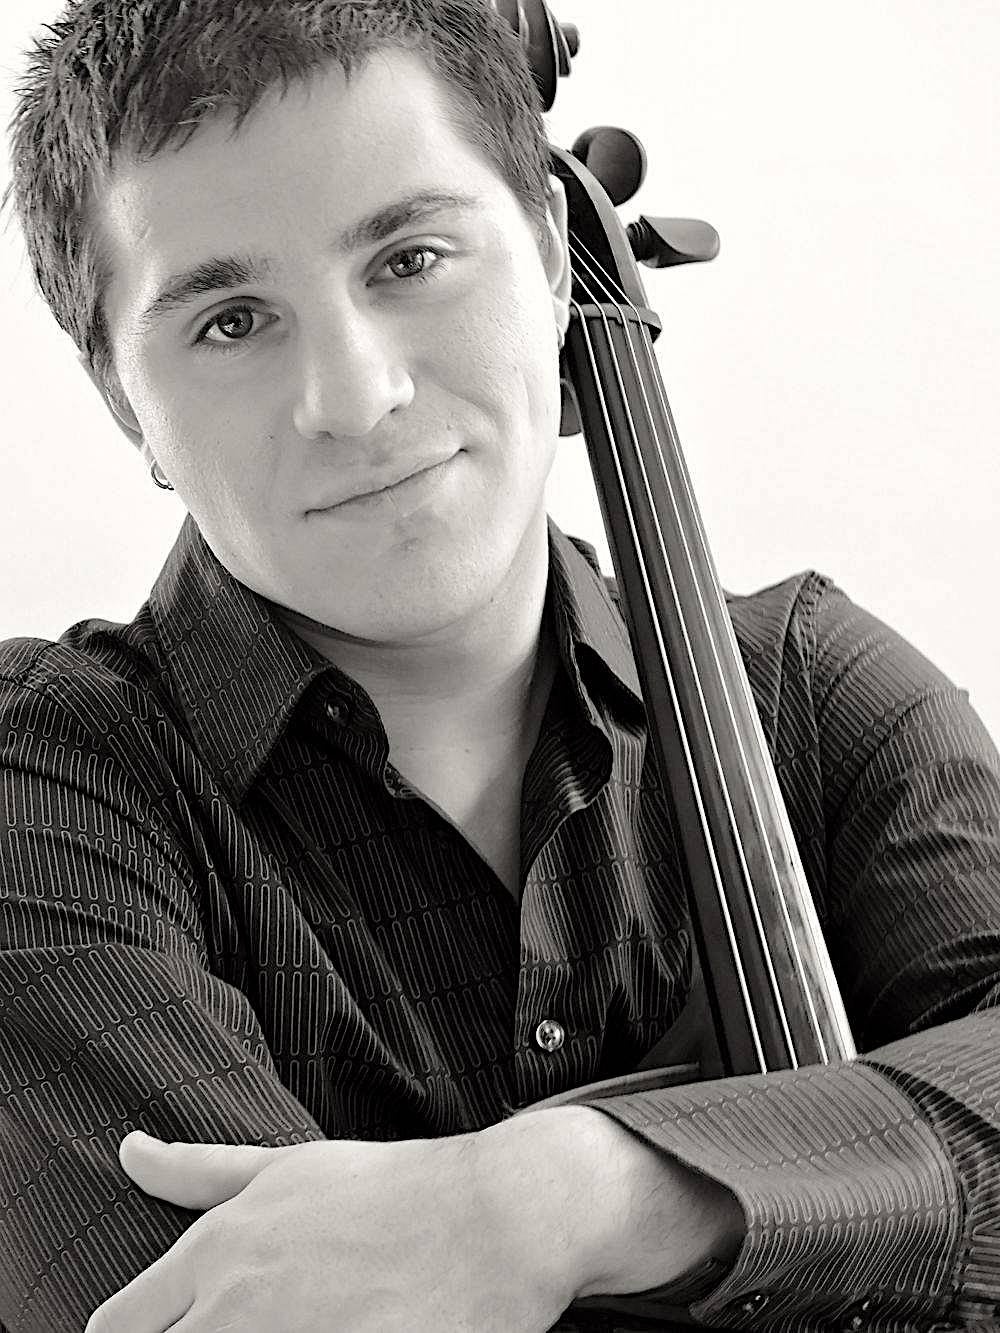 A musician wearing a button down shirt with one arm crossed across his chest holding the neck of a cello up against his shoulder and behind his head.